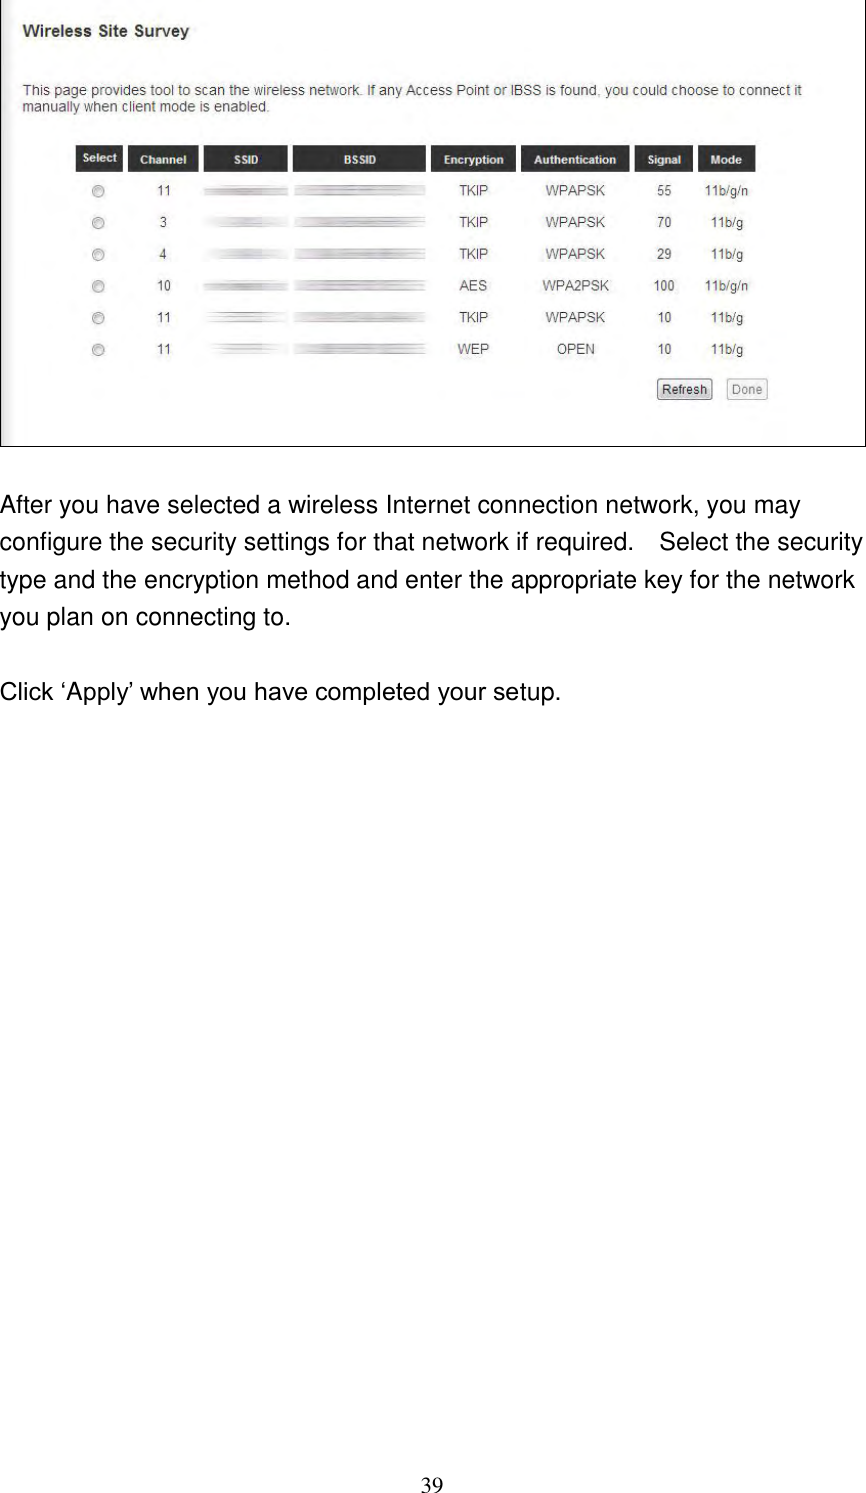 39   After you have selected a wireless Internet connection network, you may configure the security settings for that network if required.    Select the security type and the encryption method and enter the appropriate key for the network you plan on connecting to.    Click „Apply‟ when you have completed your setup.                    